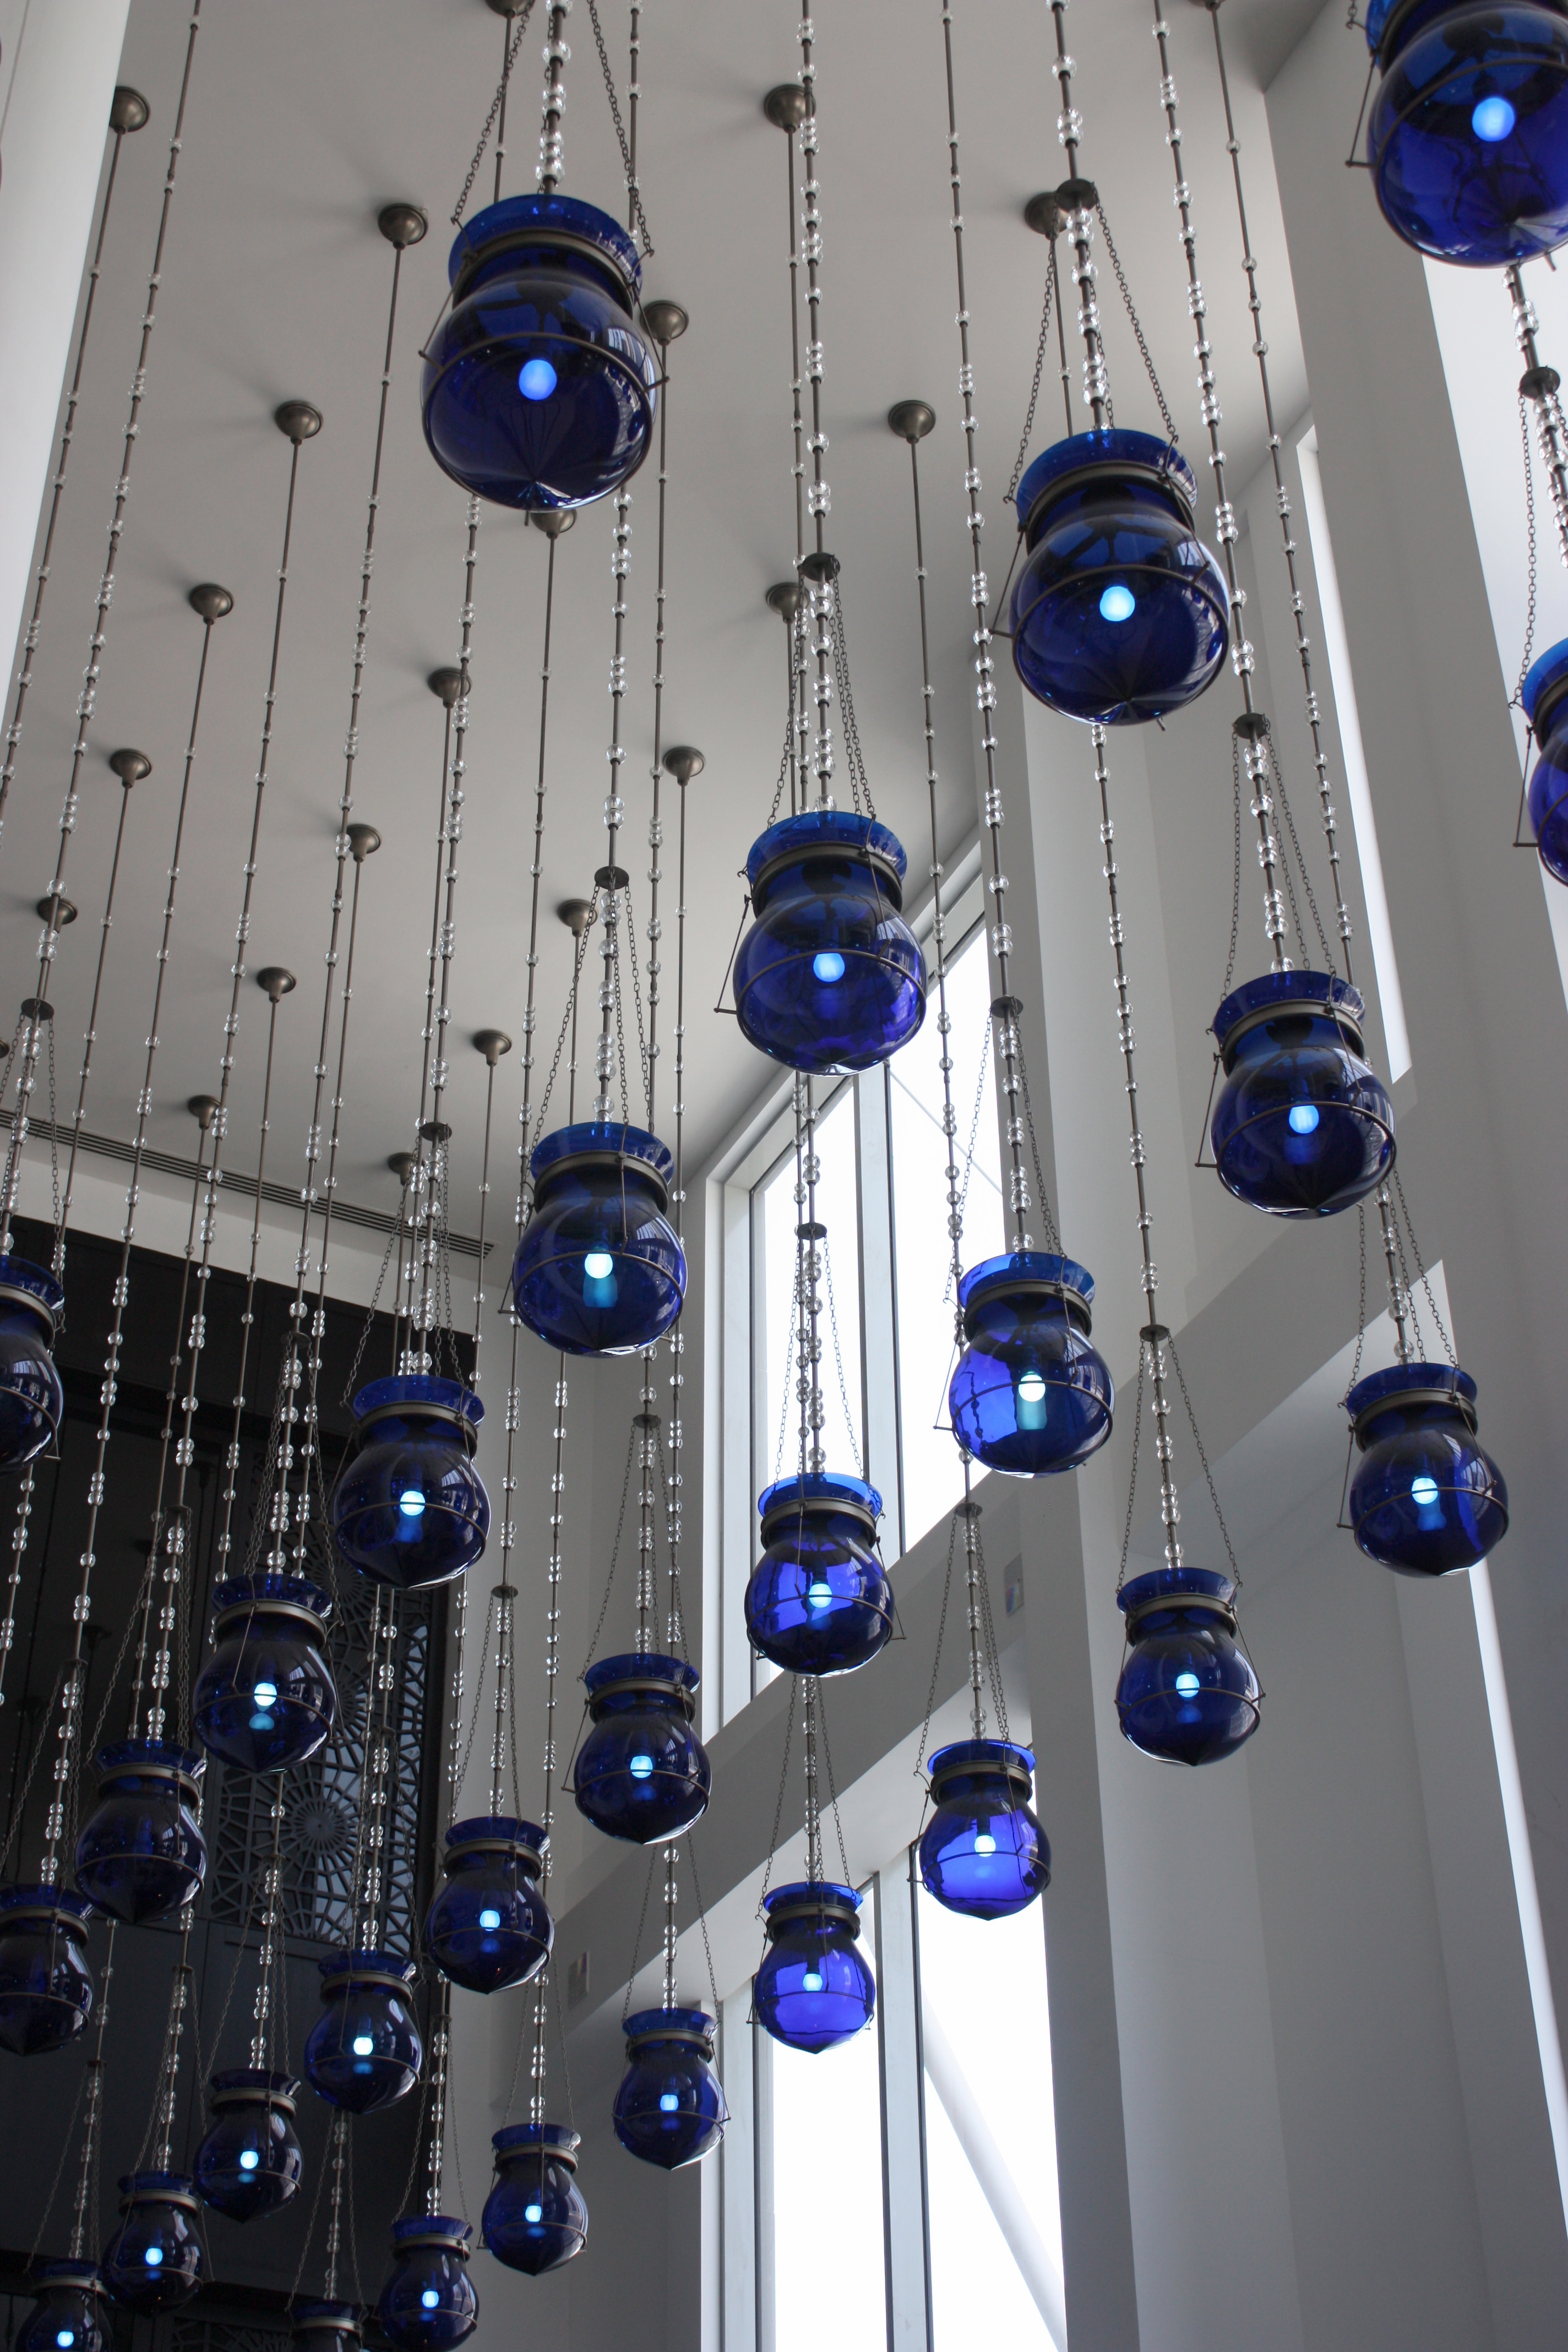 blue drop ceiling lamps turned on